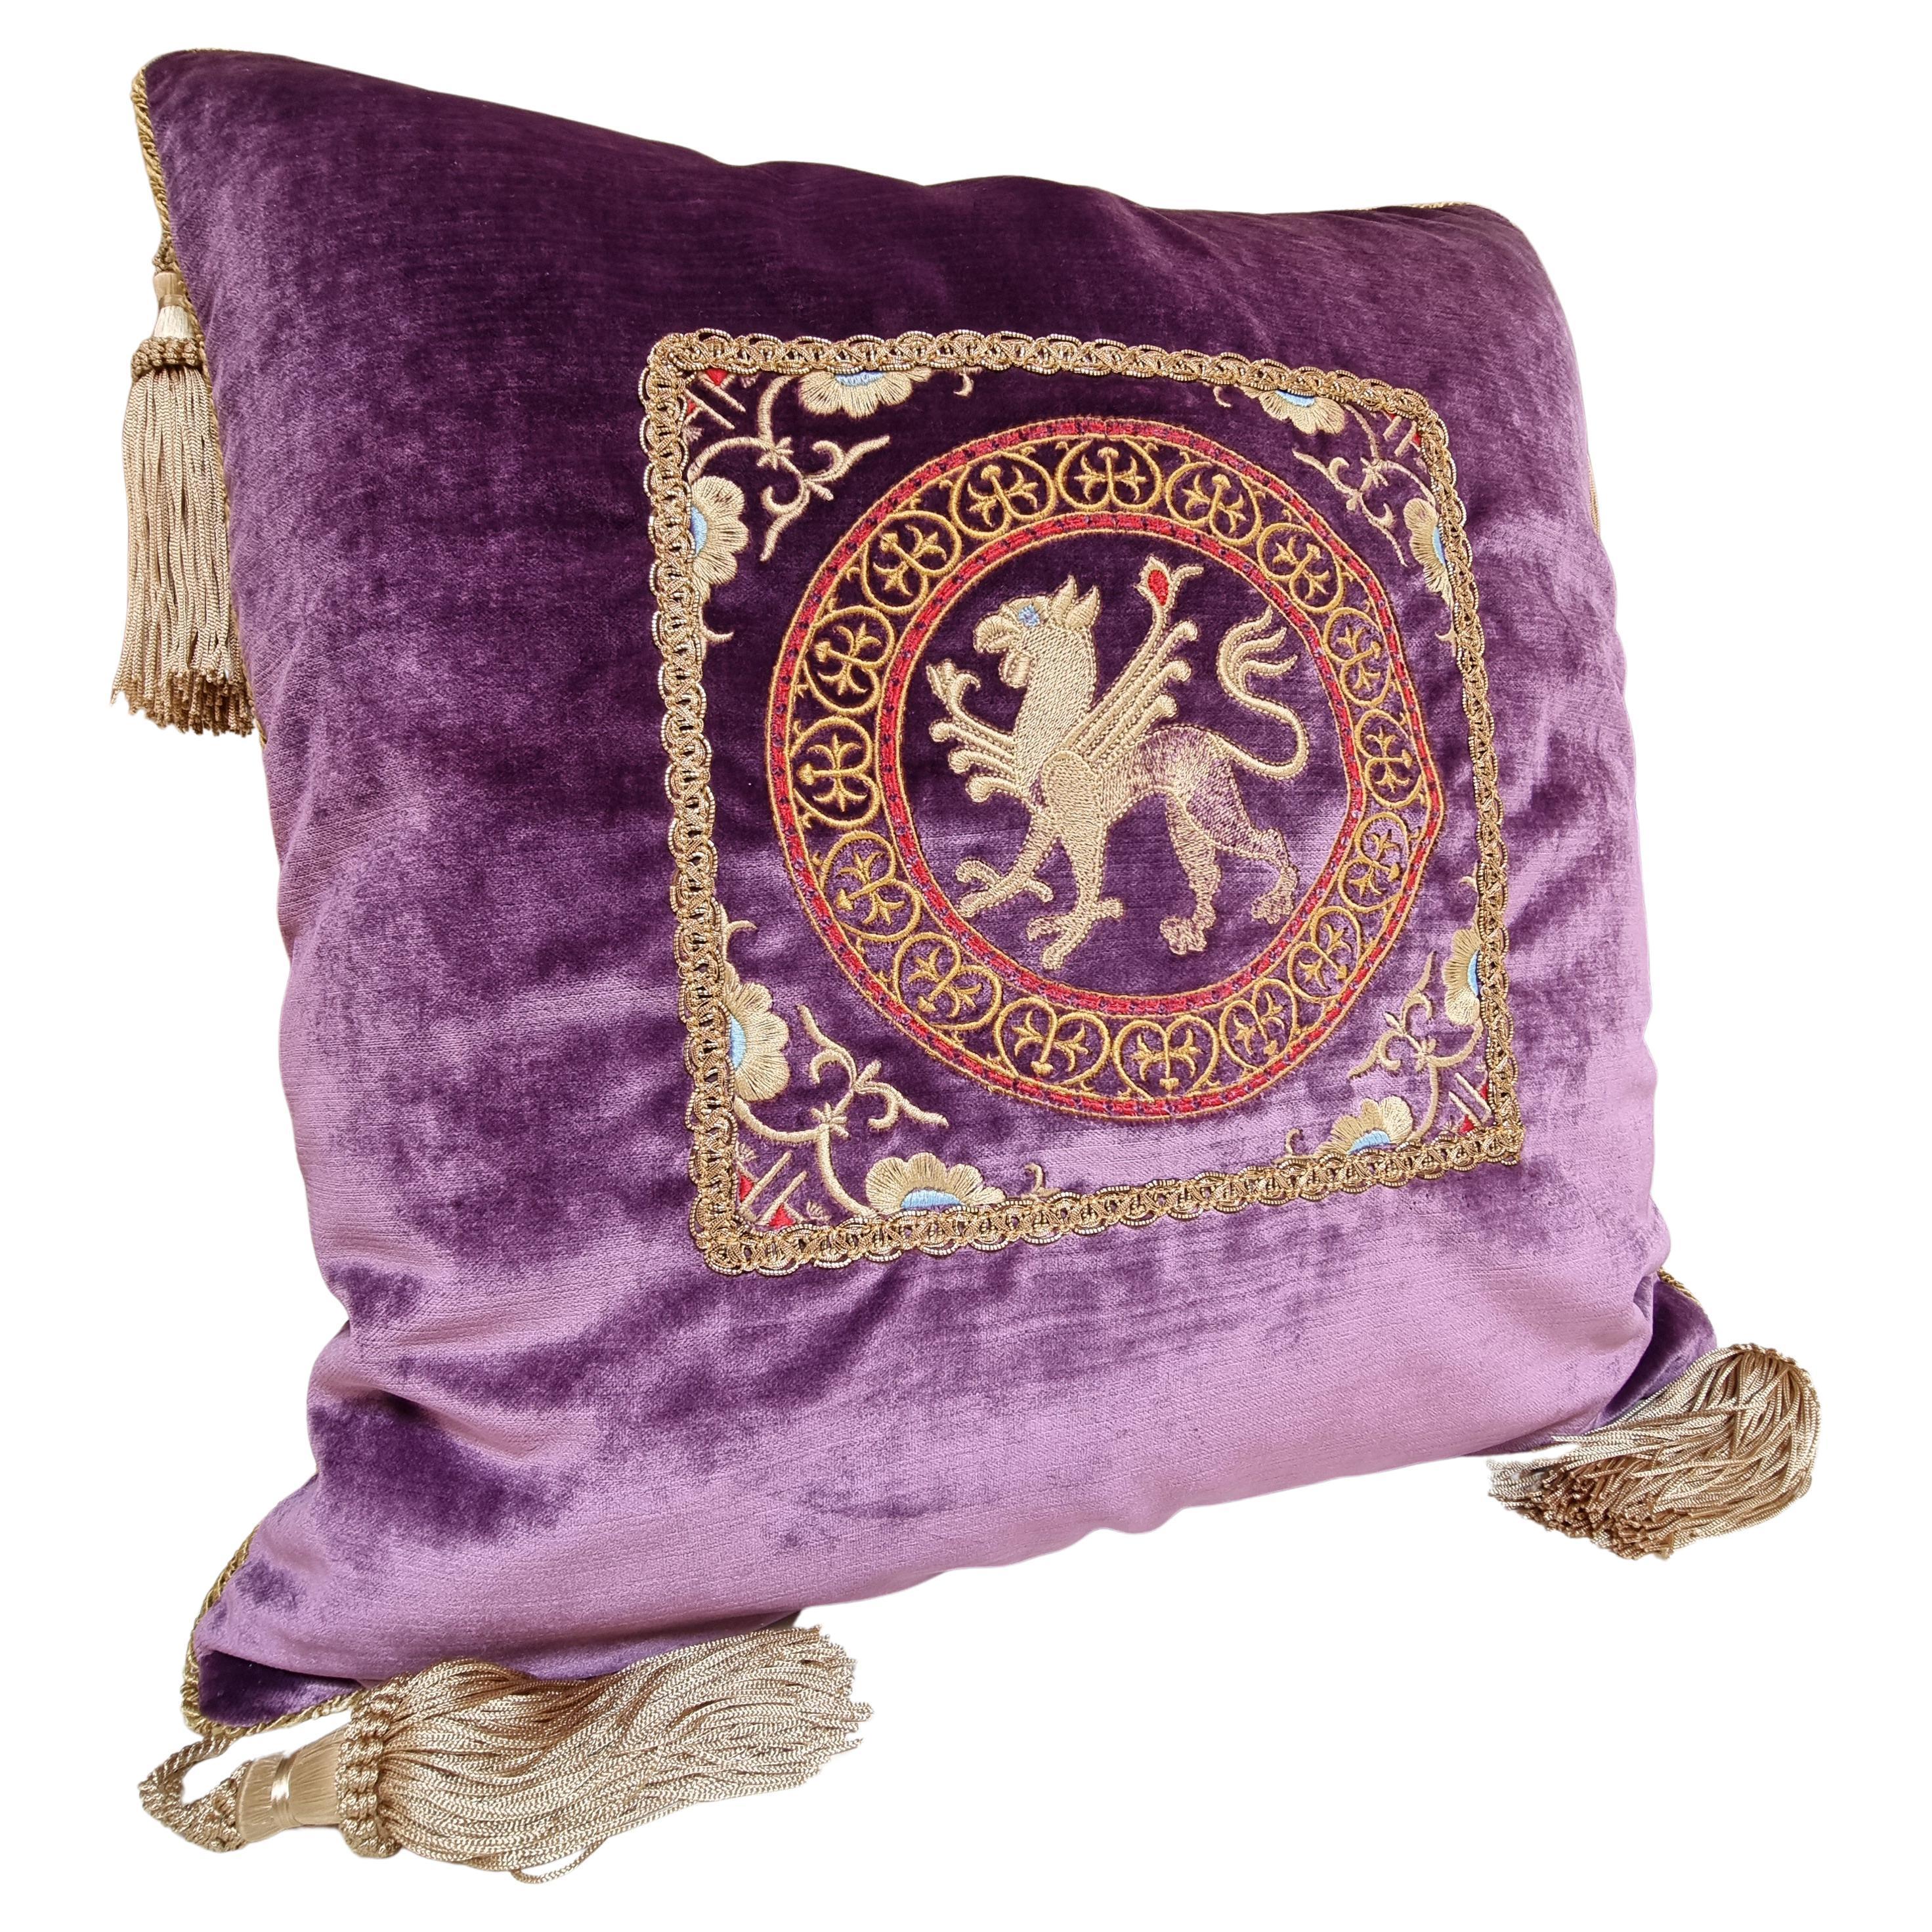 This amazing decorative pillow with beige tassel at the four corners is handmade using Rubelli  velvet in purple color on both sides finished with Houlès  twisted lip cord, embellished with precious embroideries (13th-century design) framed with